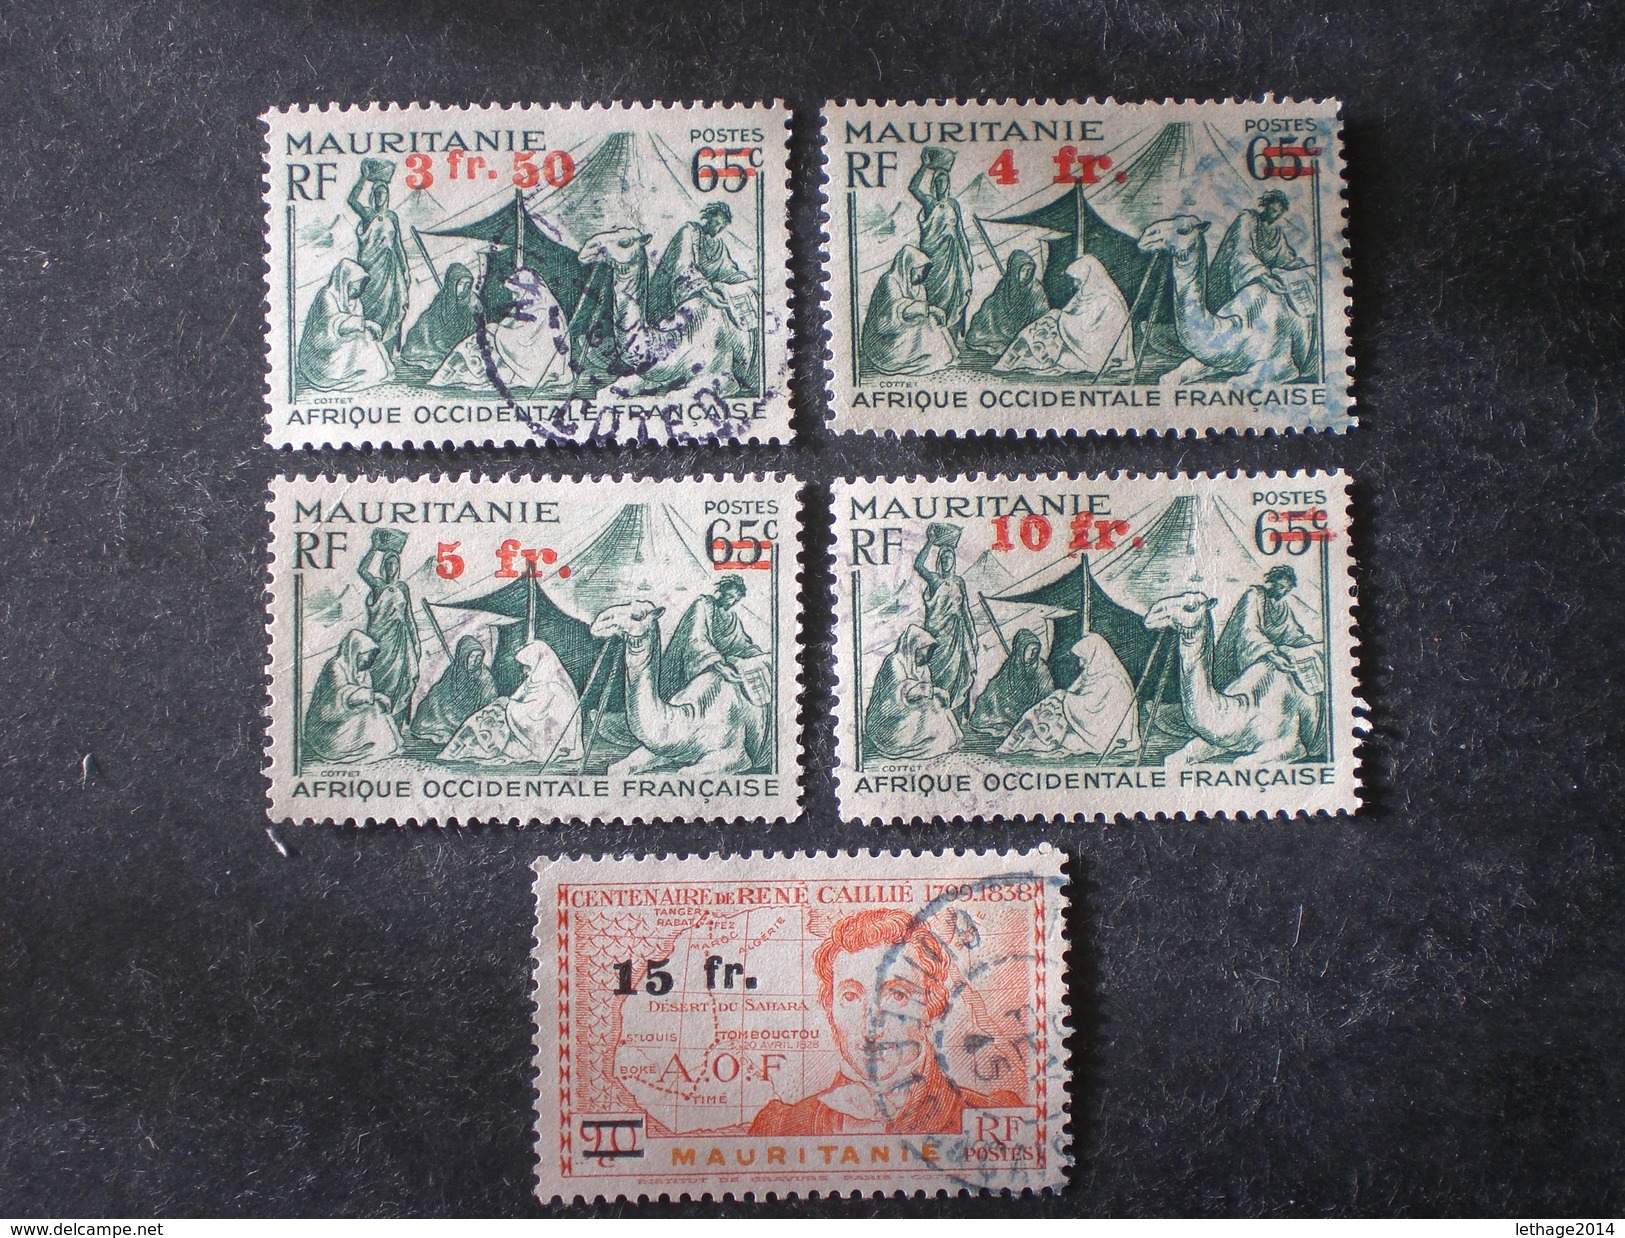 AOF MAURITANIA MAURITANIE موريتانيا Mauritanië 1944 Issues Of 1938 And 1939 Surcharged - Oblitérés